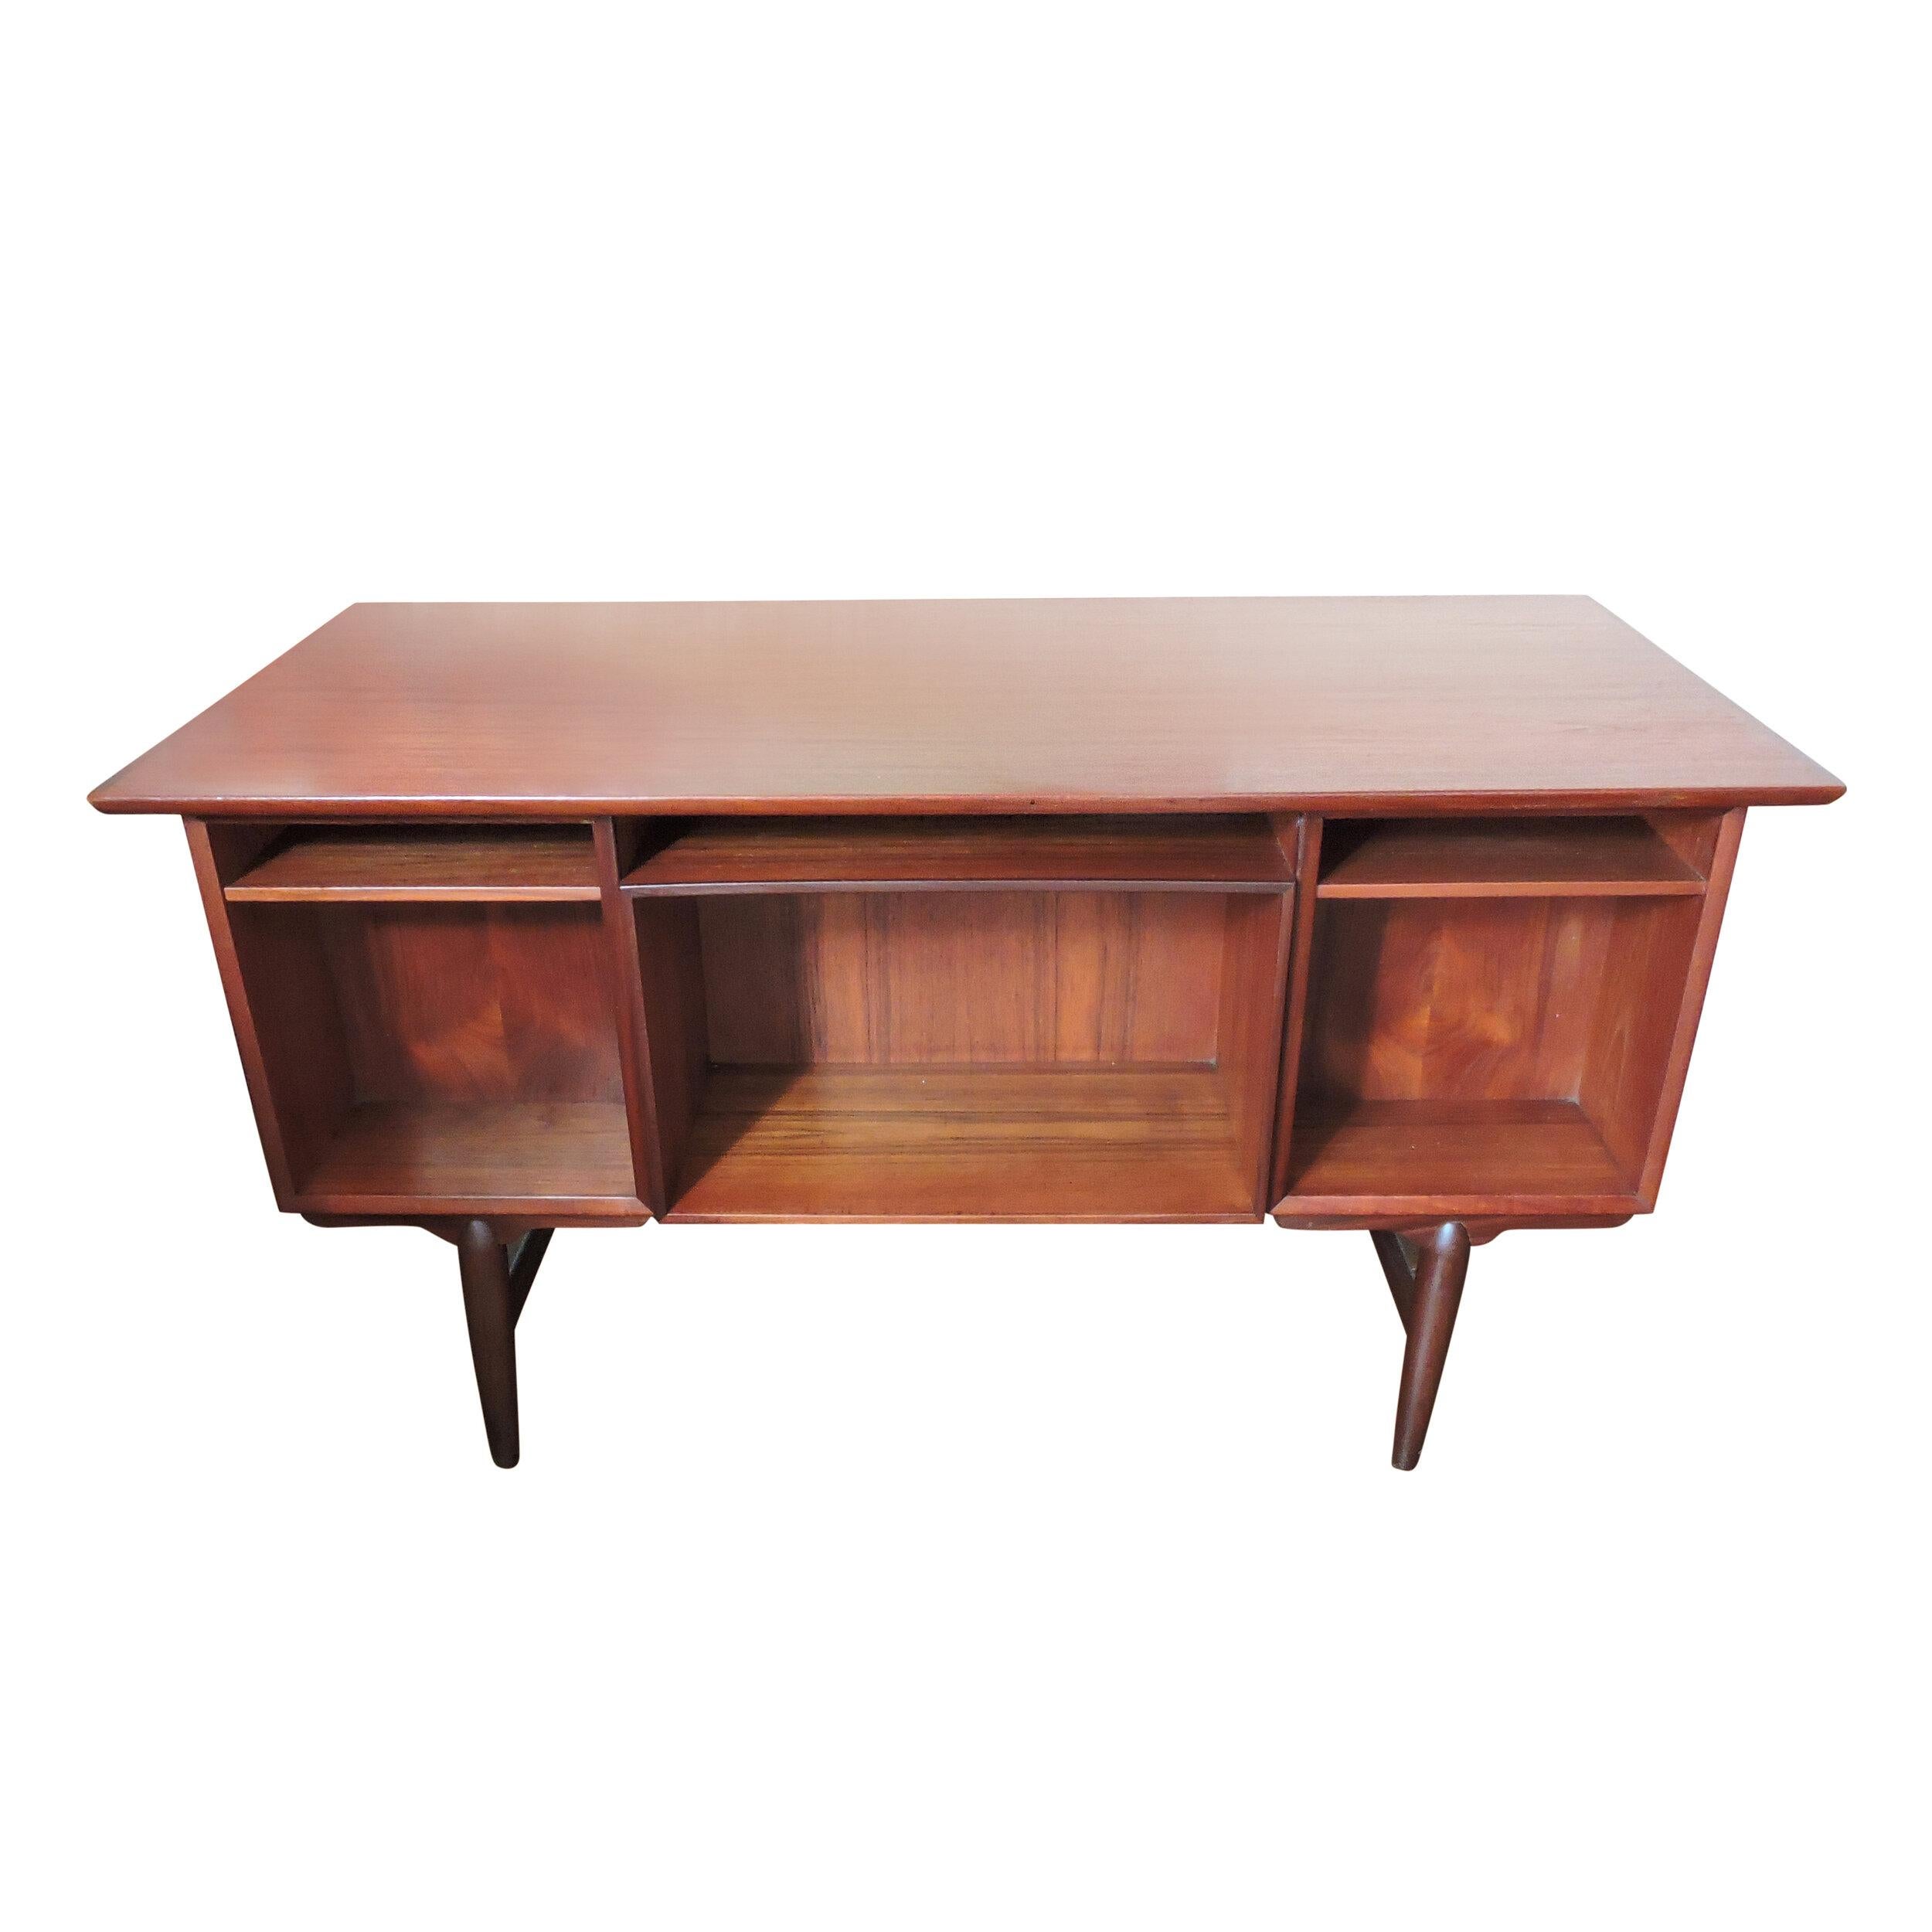 Design Period - 1960 to 1969

Country of Manufacture - Denmark

Style - Mid-Century

Detailed Condition - Good with minimal defects.

Restoration and Damage Details - Light wear consistent with age and use

Materials - Teak

Colour -